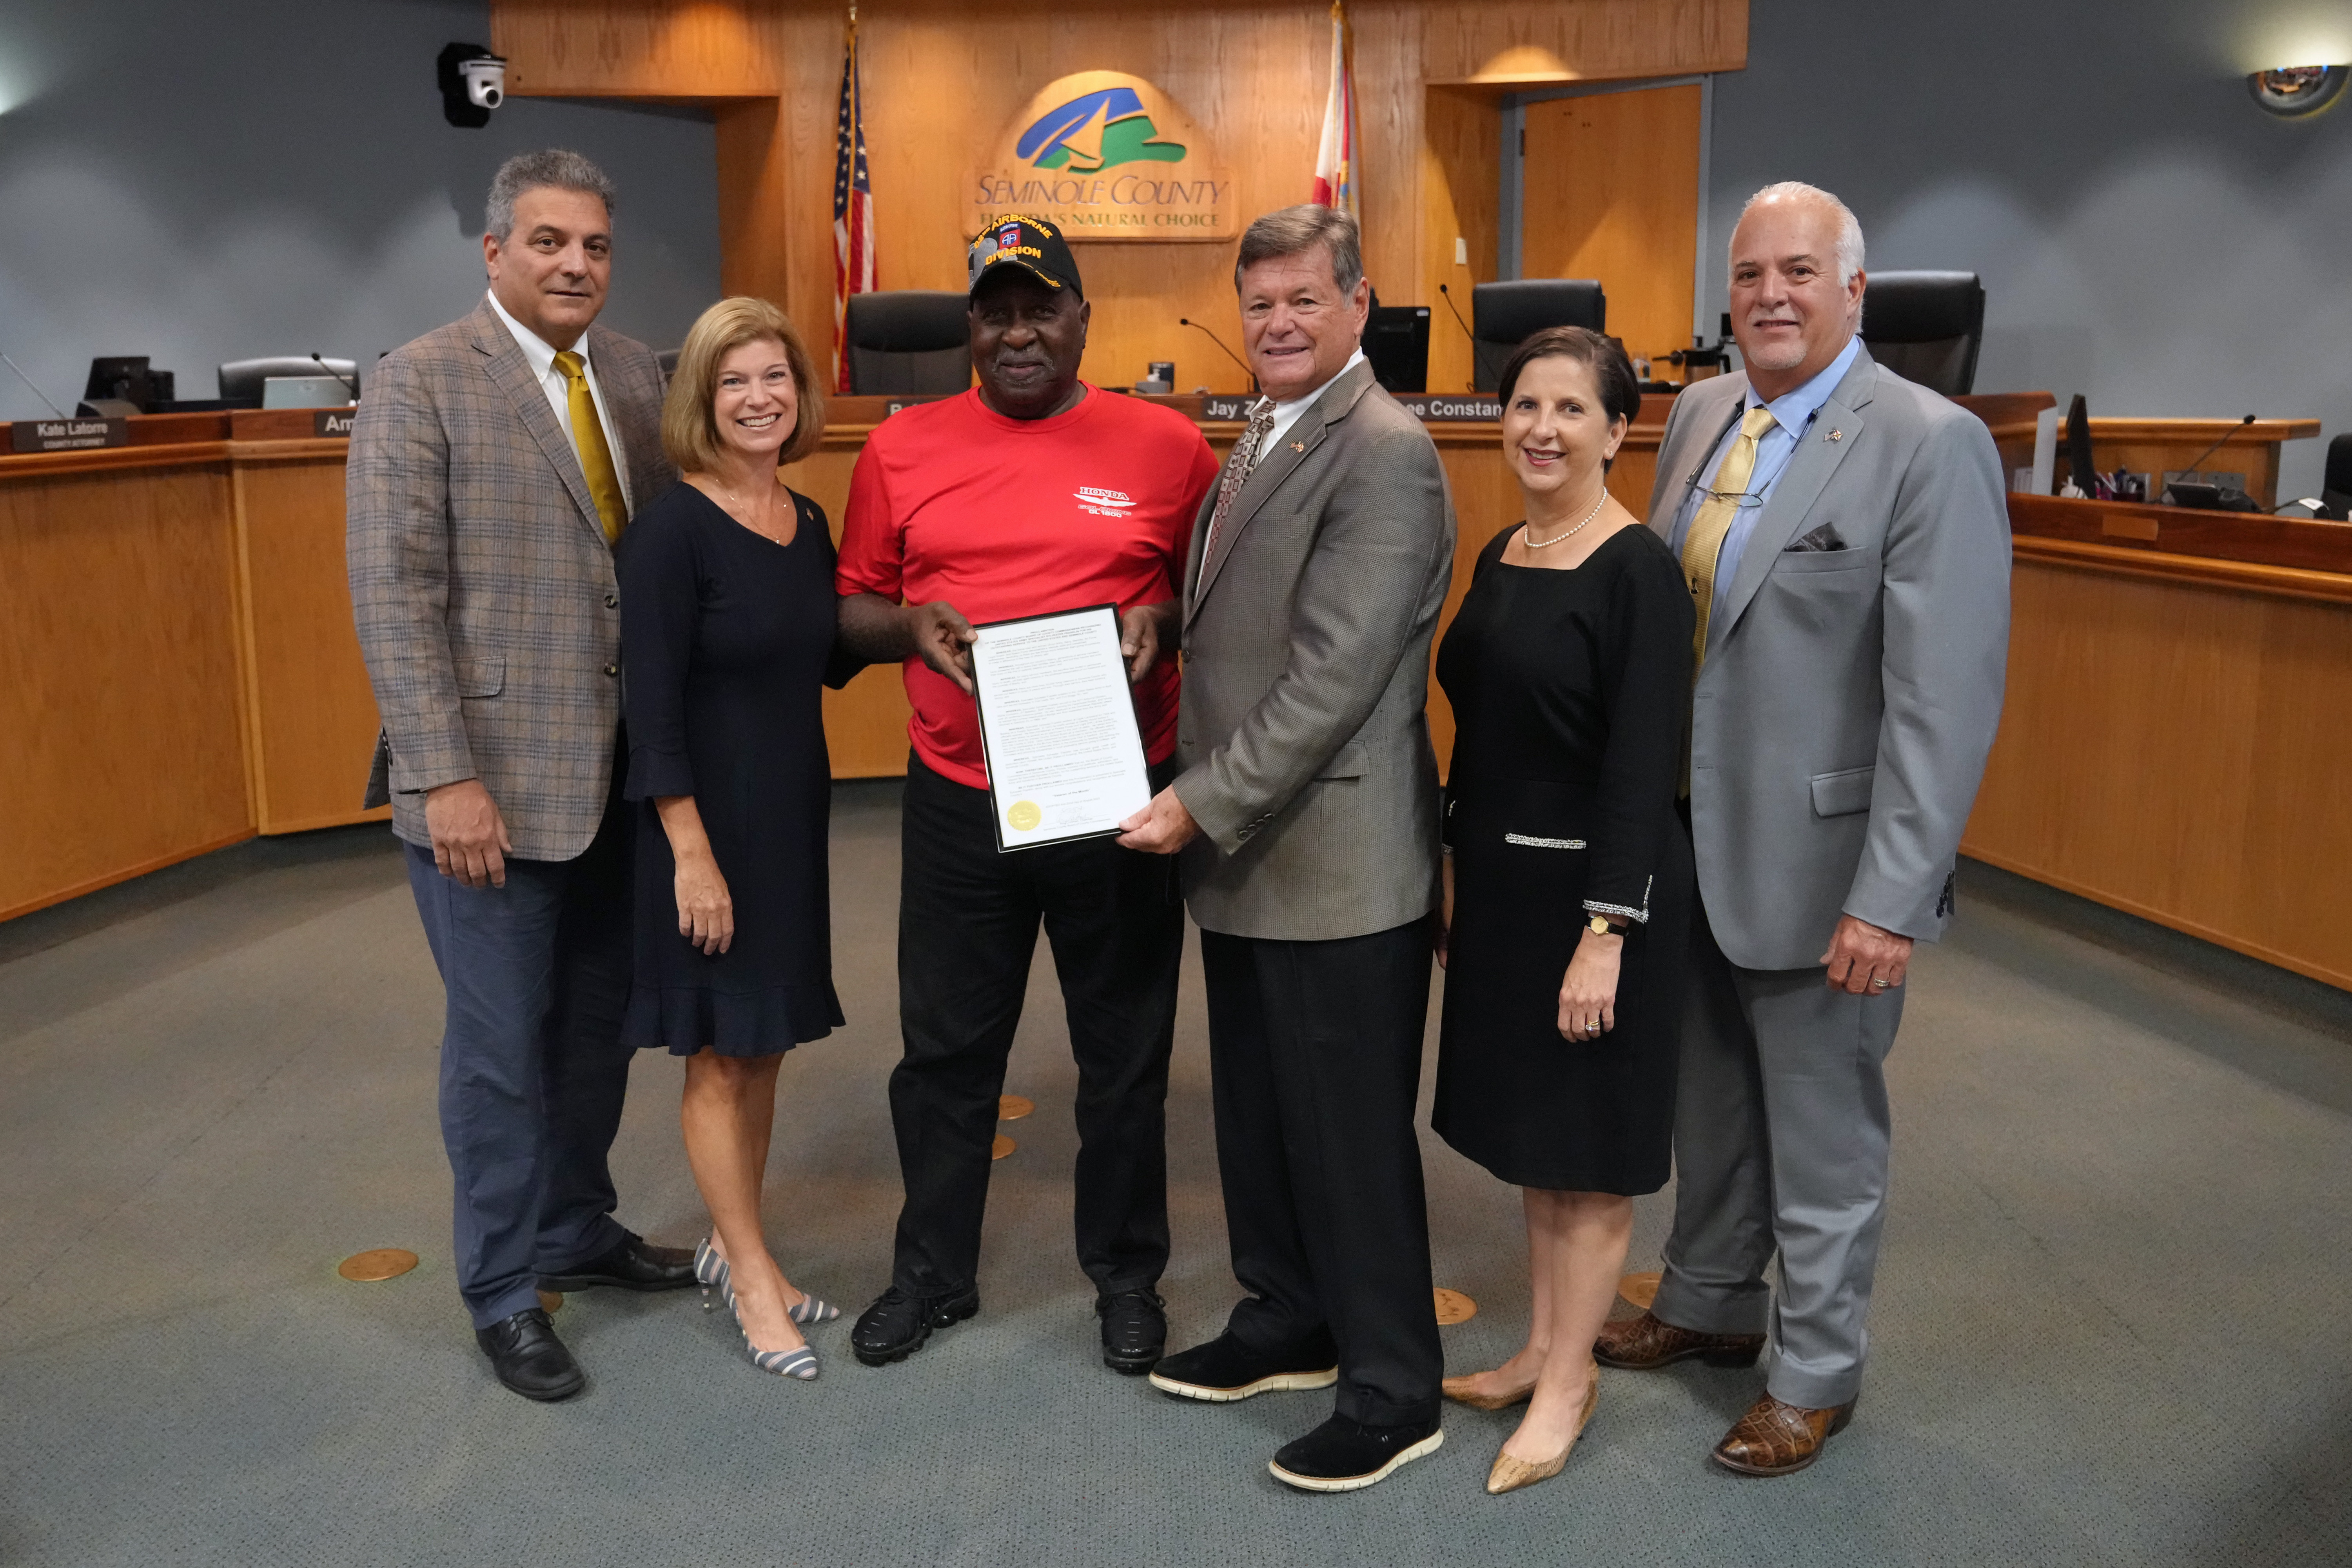 Proclamation - Proclaiming Specialist Sylvester Franklin, United States Army as Seminole County's August Veteran of the Month. (Specialist Sylvester Franklin, United States  Army